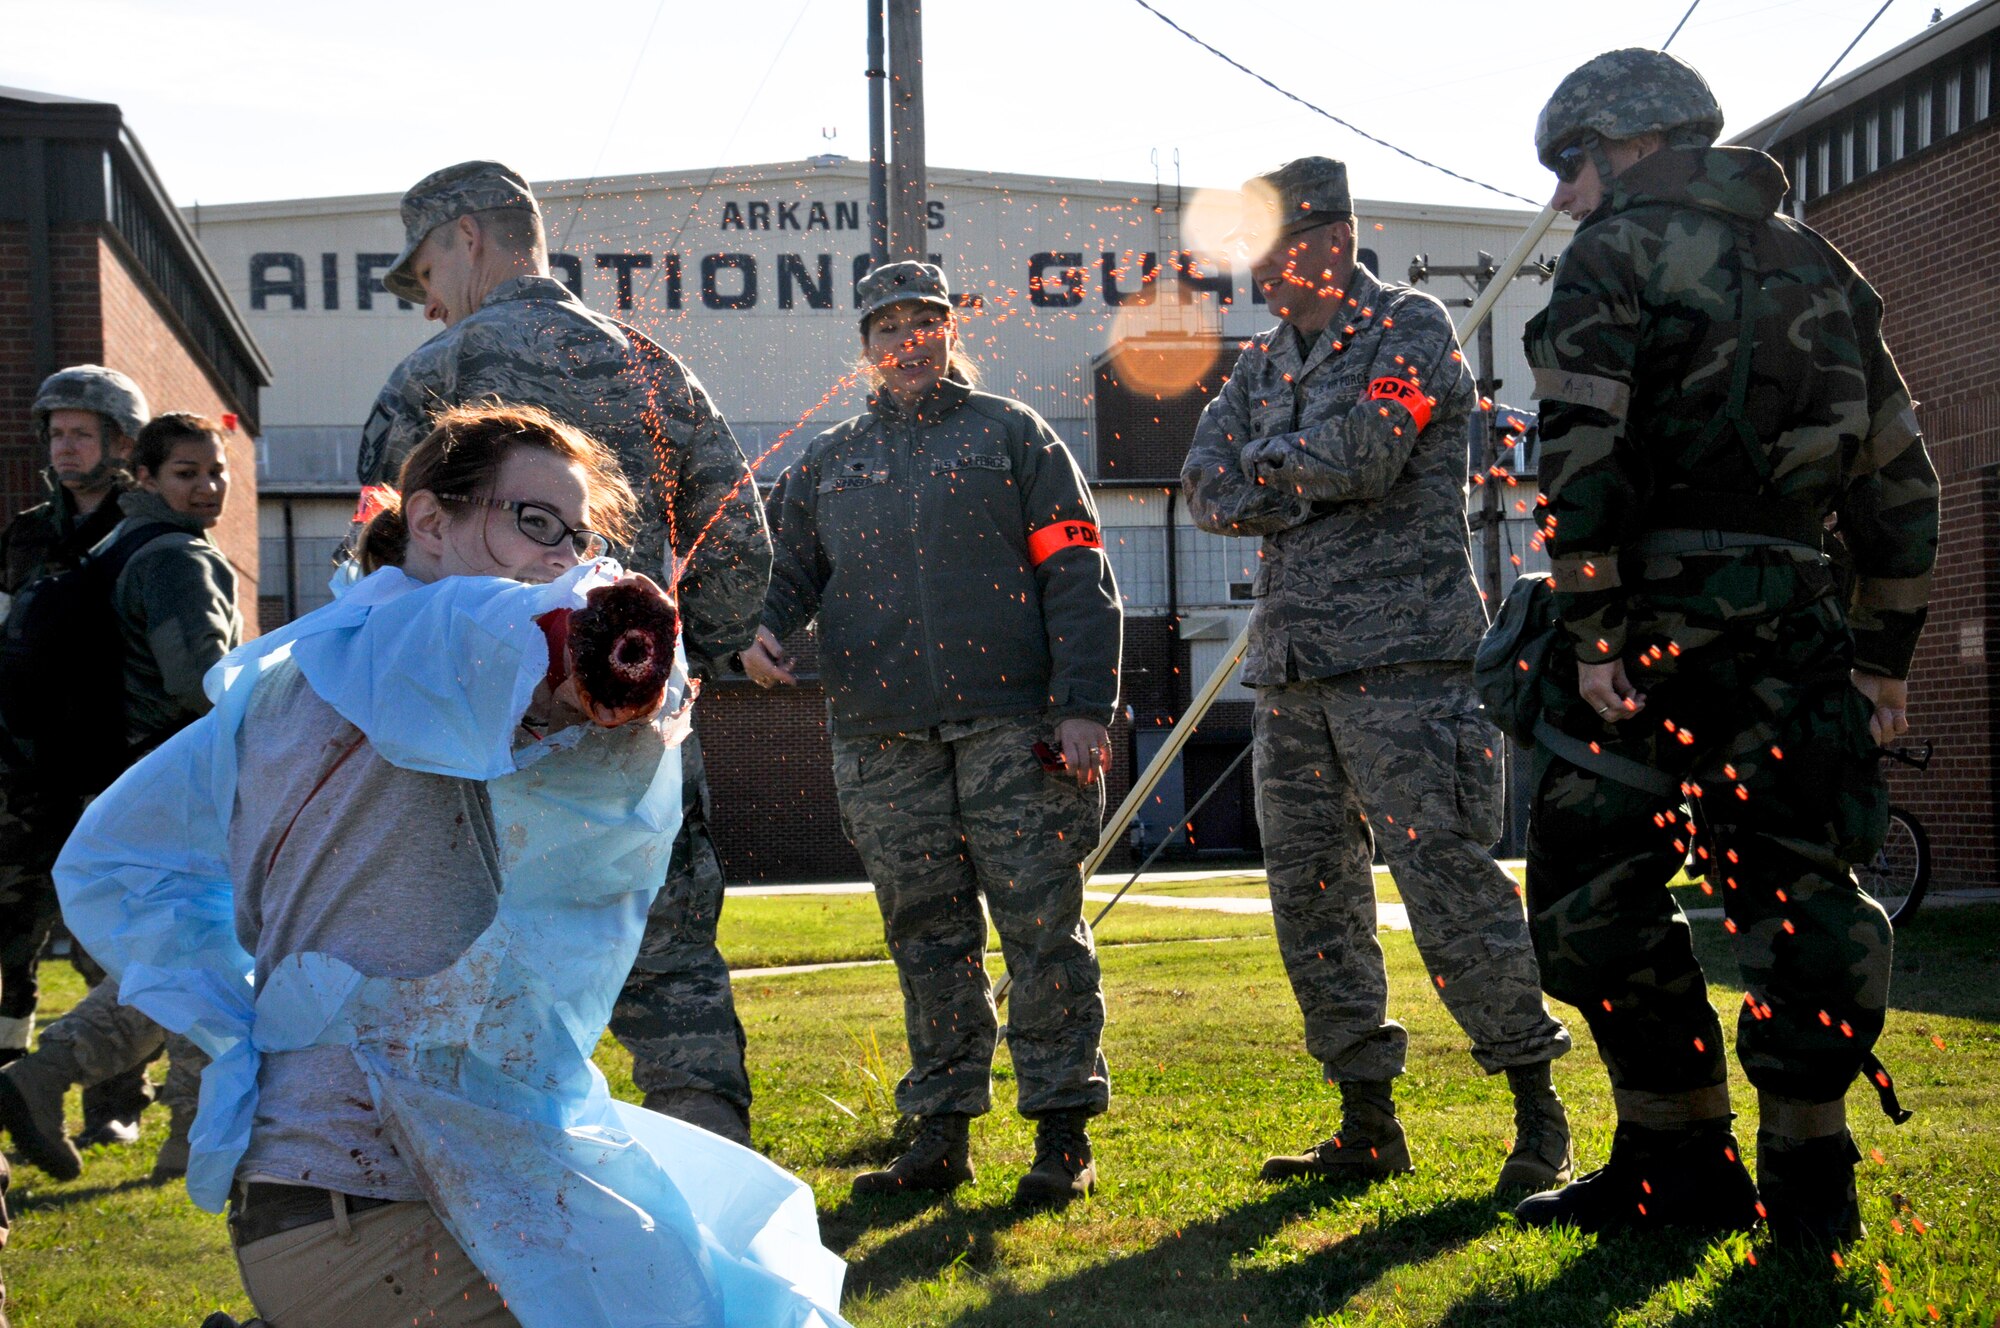 Members of the 188th Wing Student Flight role play as victims of a simulated rocket attack during a mass casualty exercise at Ebbing Air National Guard Base, Fort Smith, Ark., Nov. 2, 2014. The purpose of the exercise was to test Airmen’s ability to triage personnel while facing possible attacks. (U.S. Air National Guard photo by Staff Sgt. John Suleski/released)
